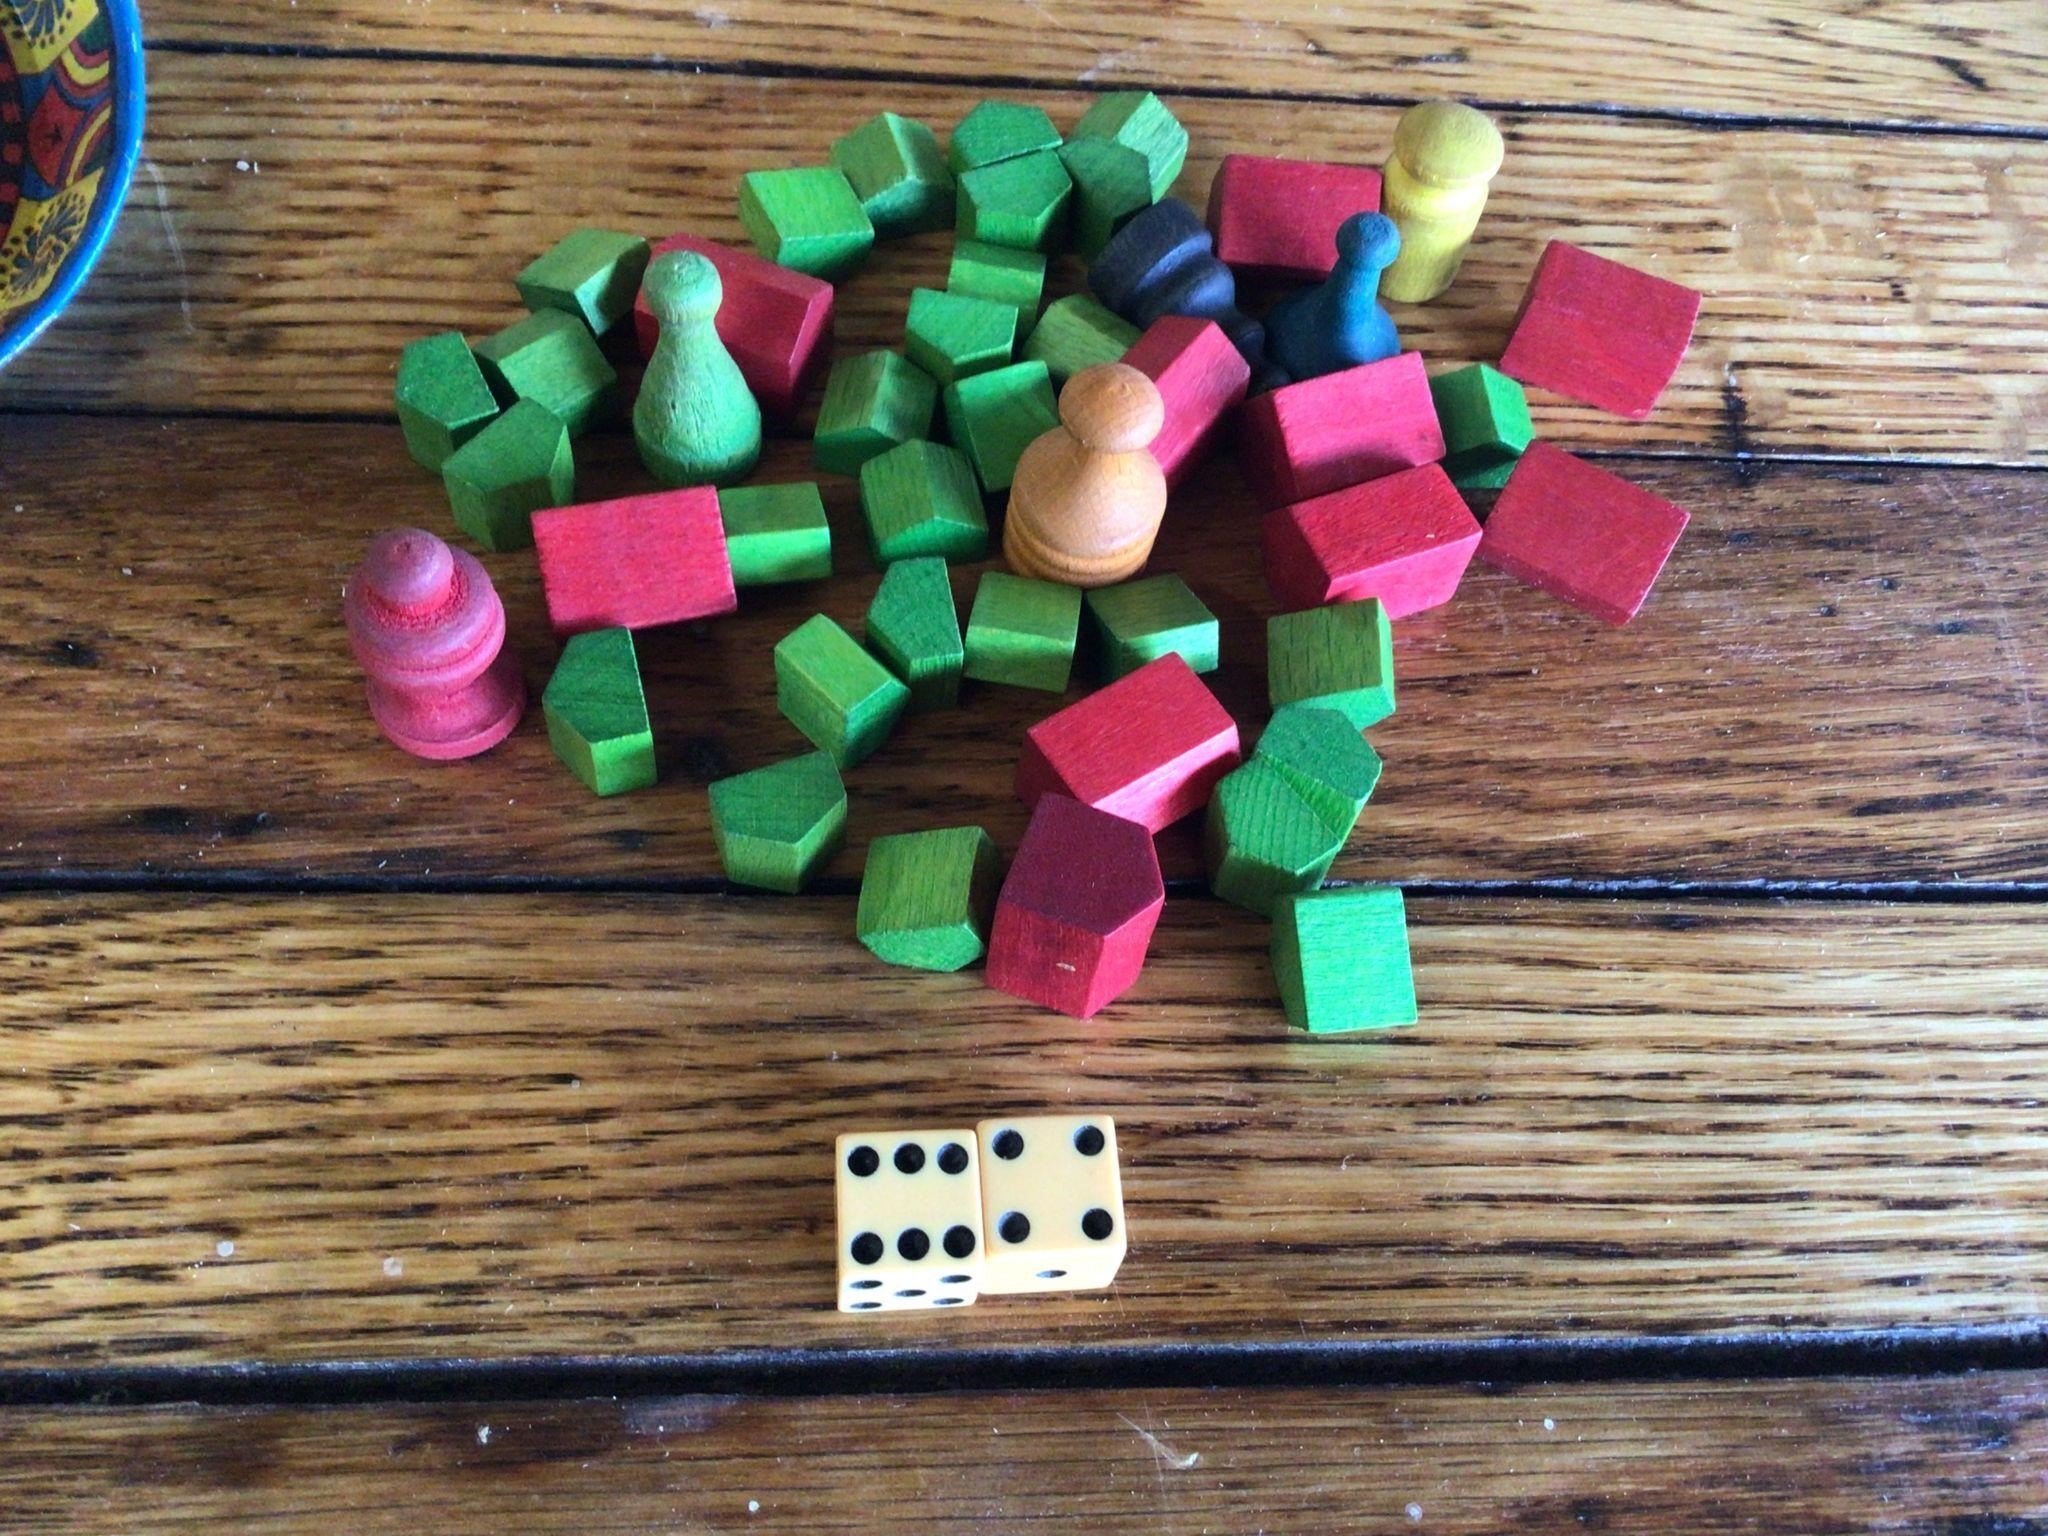 VINTAGE WOOD MONOPOLY PIECES AND DICE